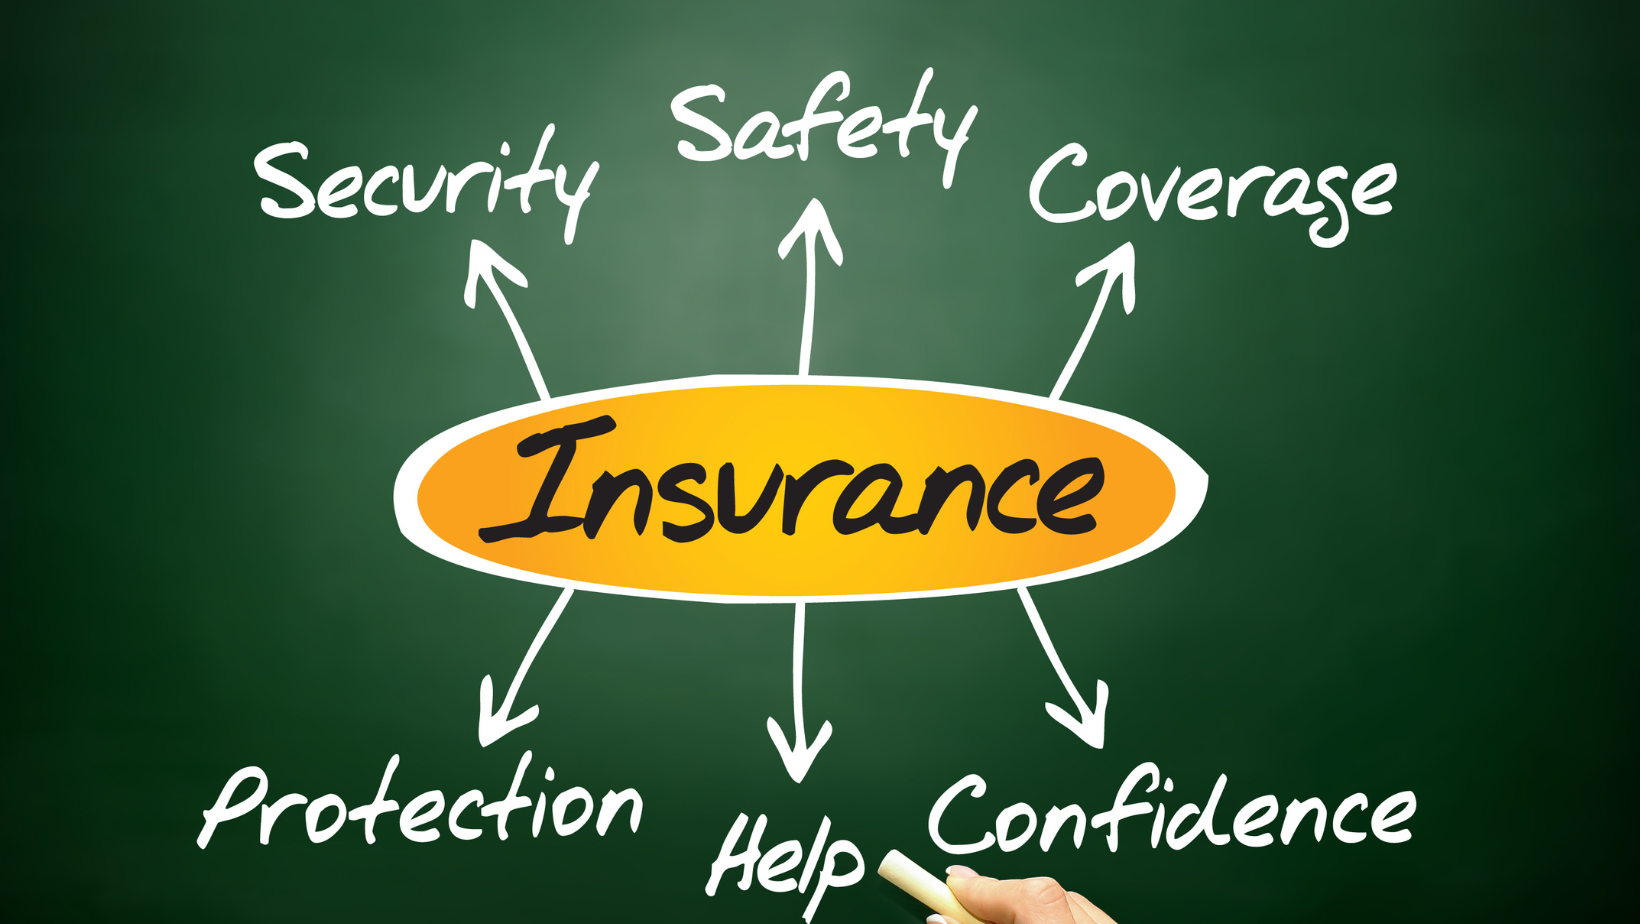 Comparing and contrasting the two insurance types